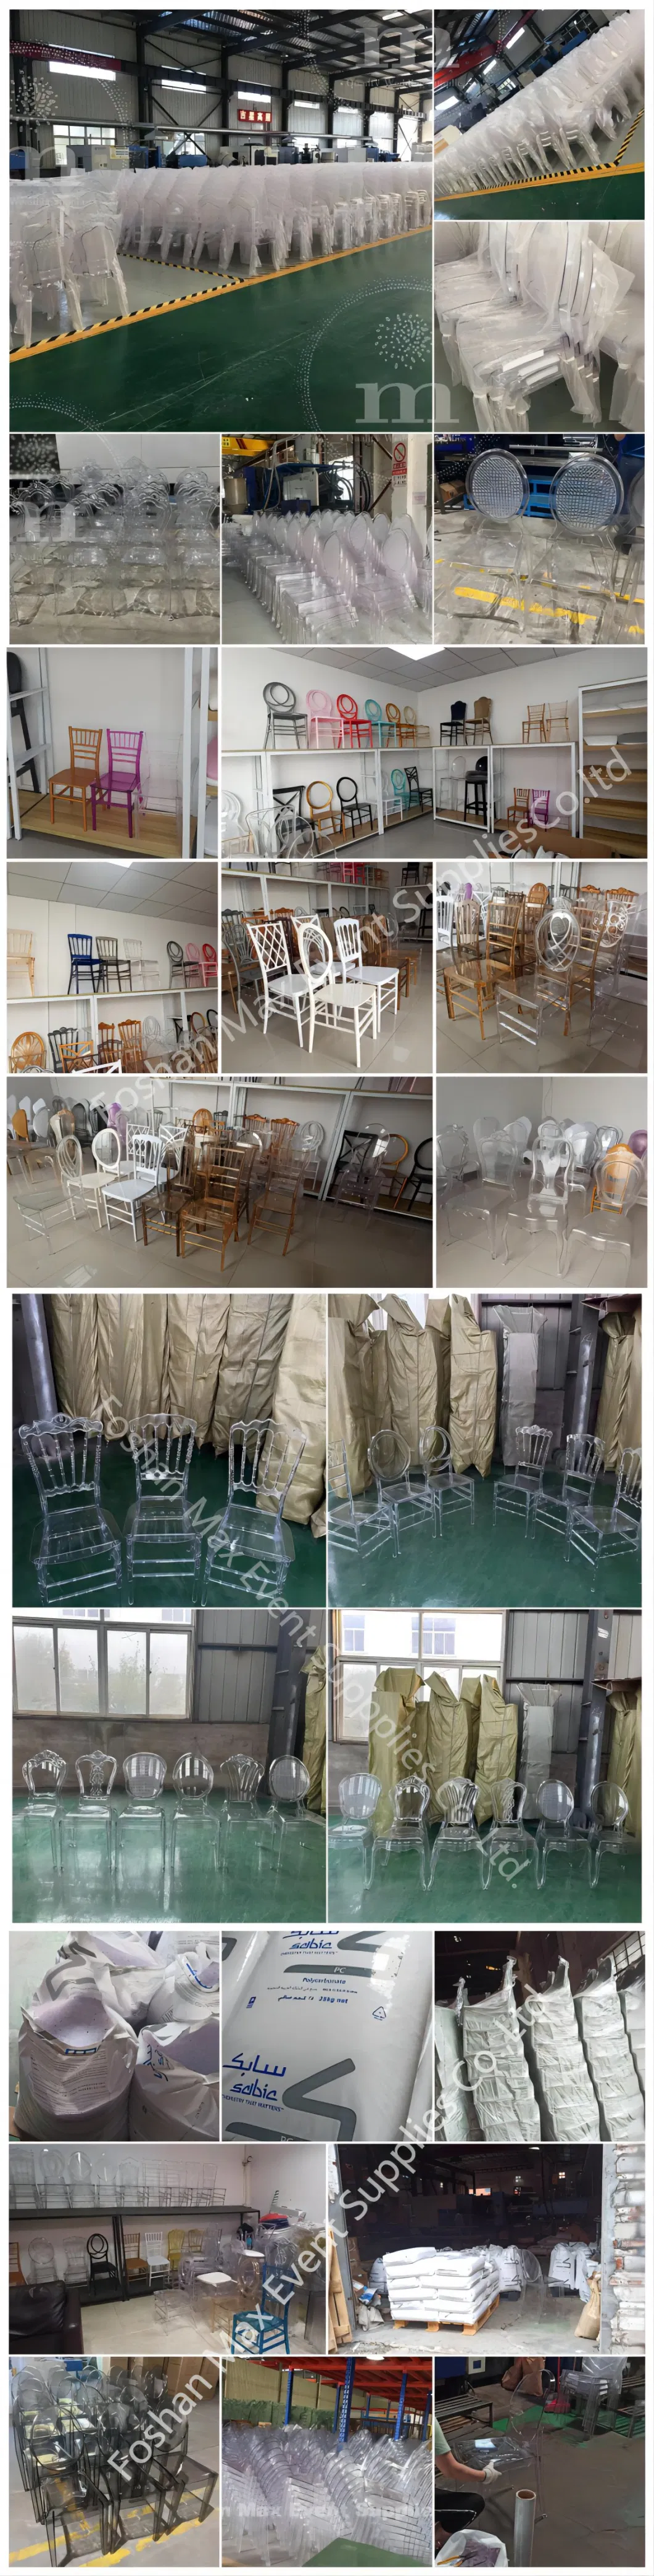 Throne Outdoor Disassembled Acrylic Kd Traditional Hotel Restaurant Wedding Furniture Banquet Chair